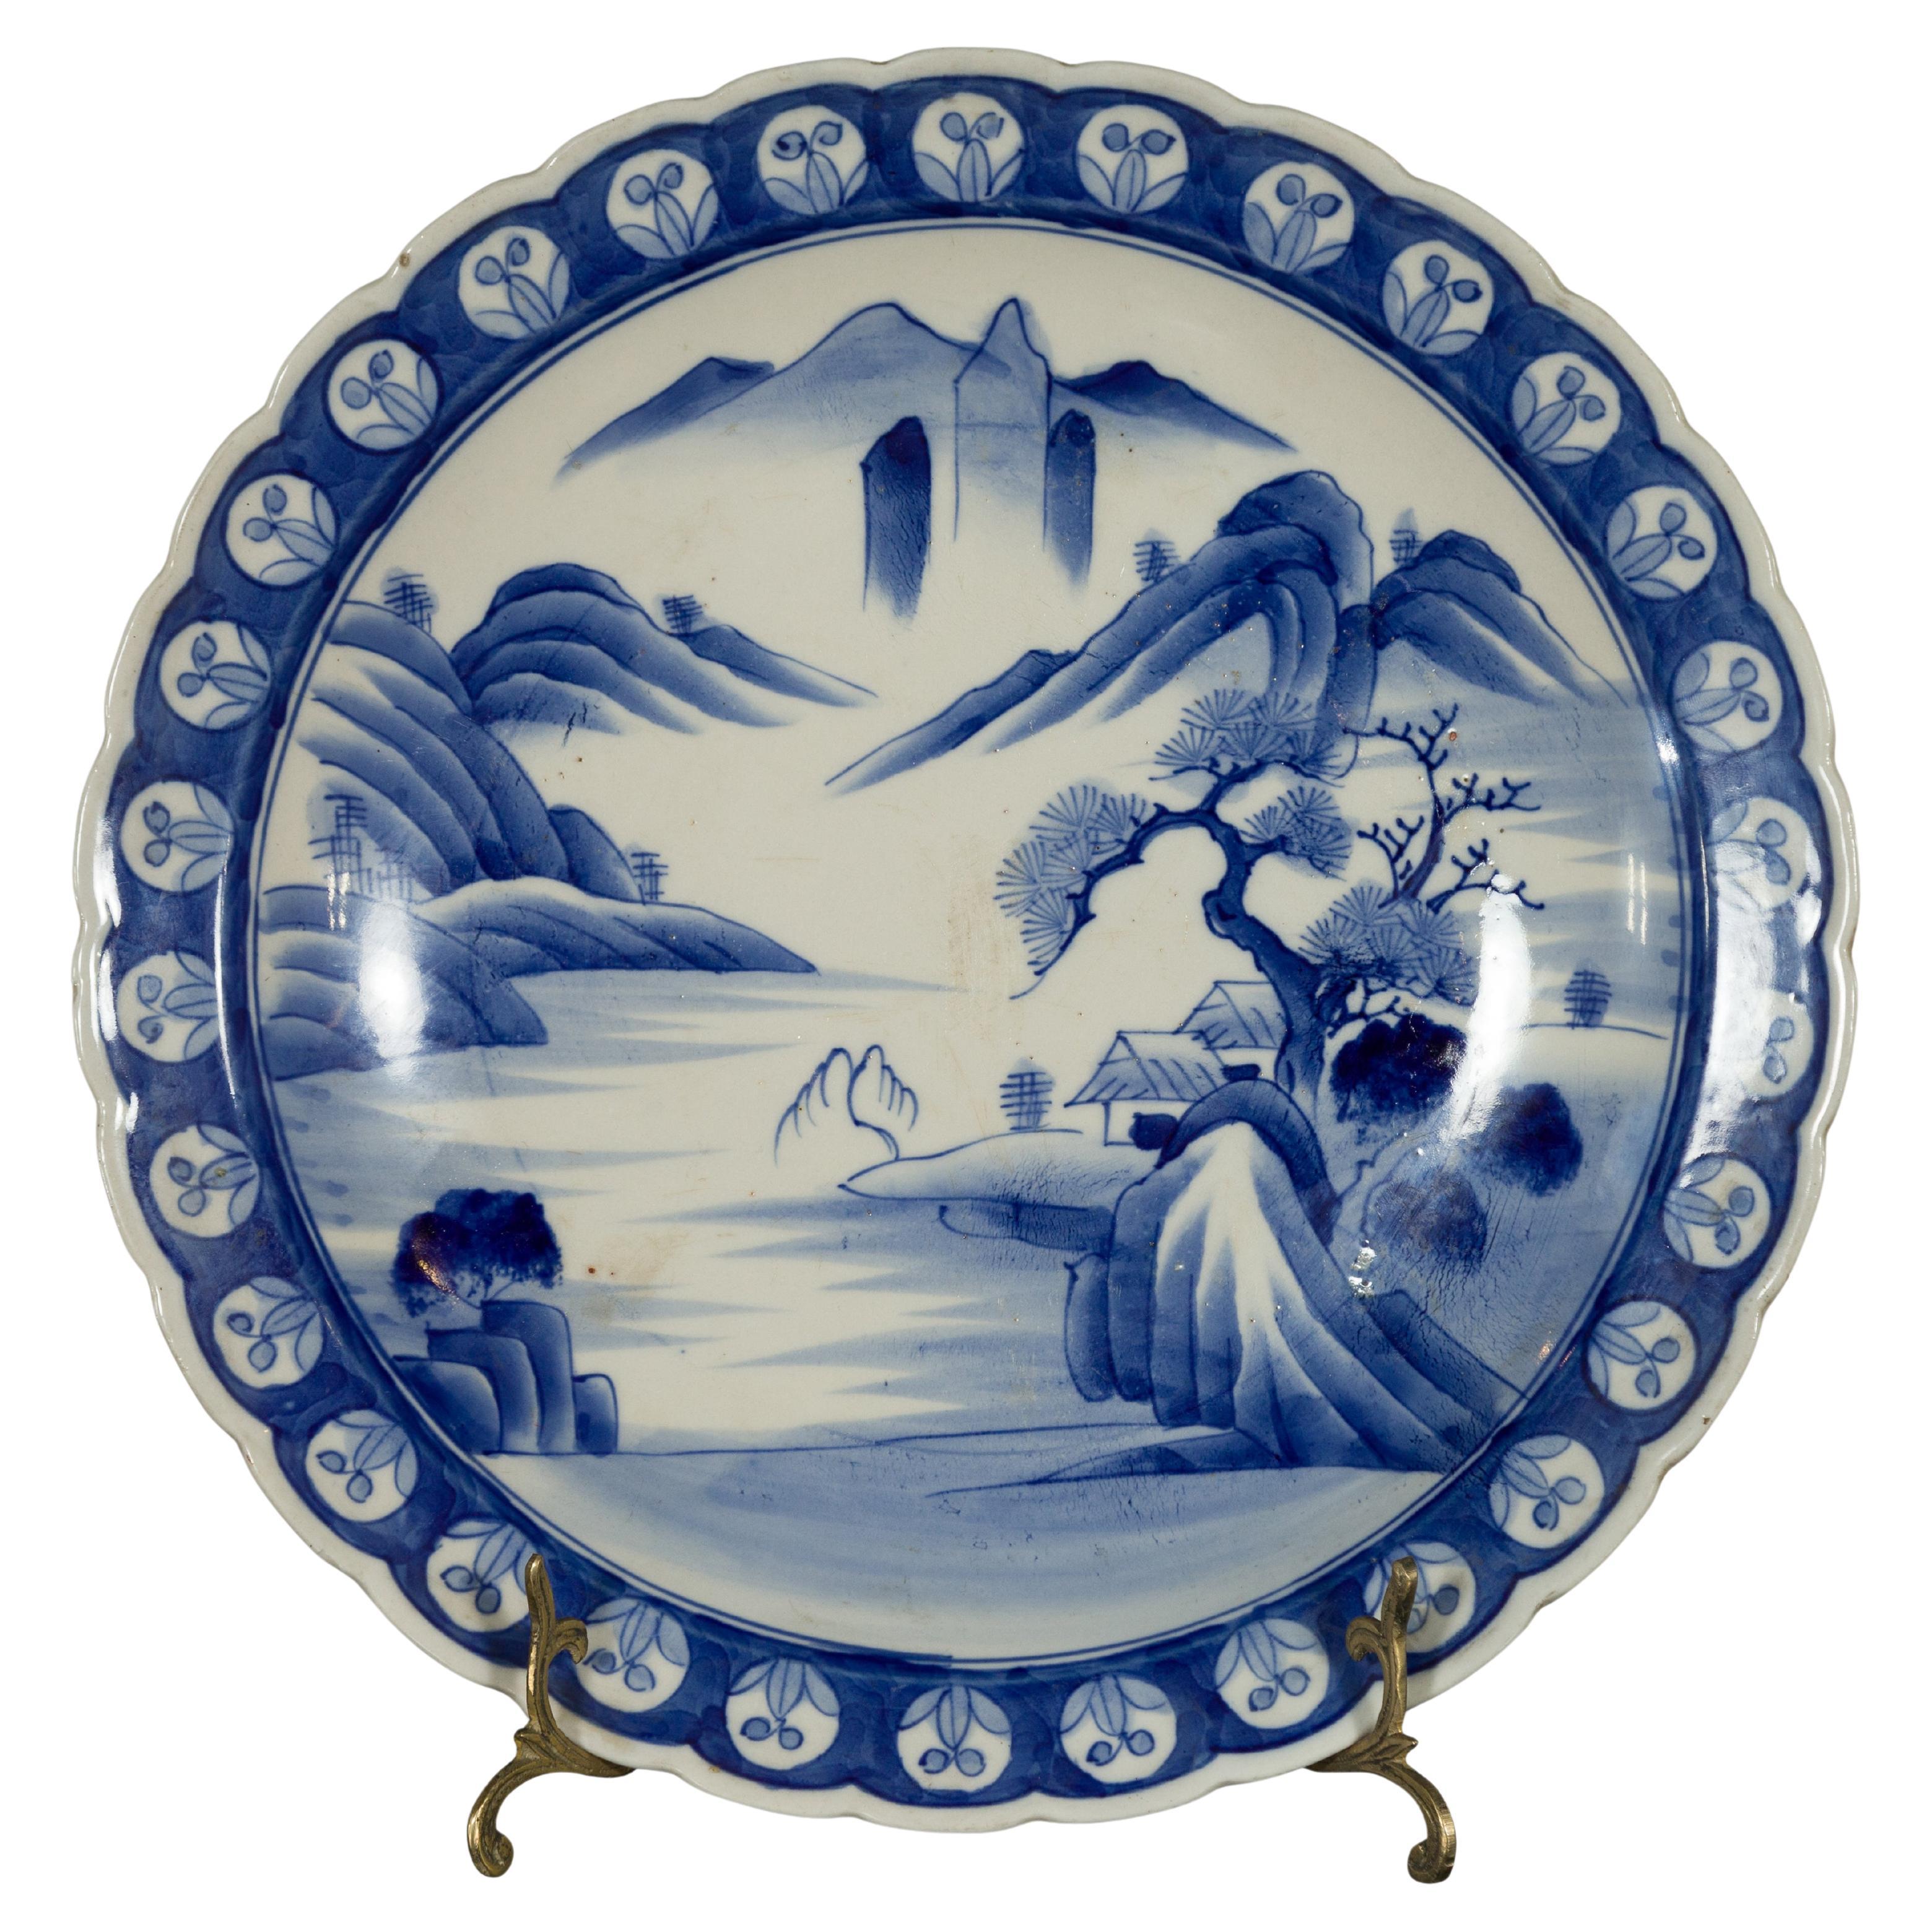 Japanese 19th Century Blue and White Porcelain Plate with Mountainous Landscape